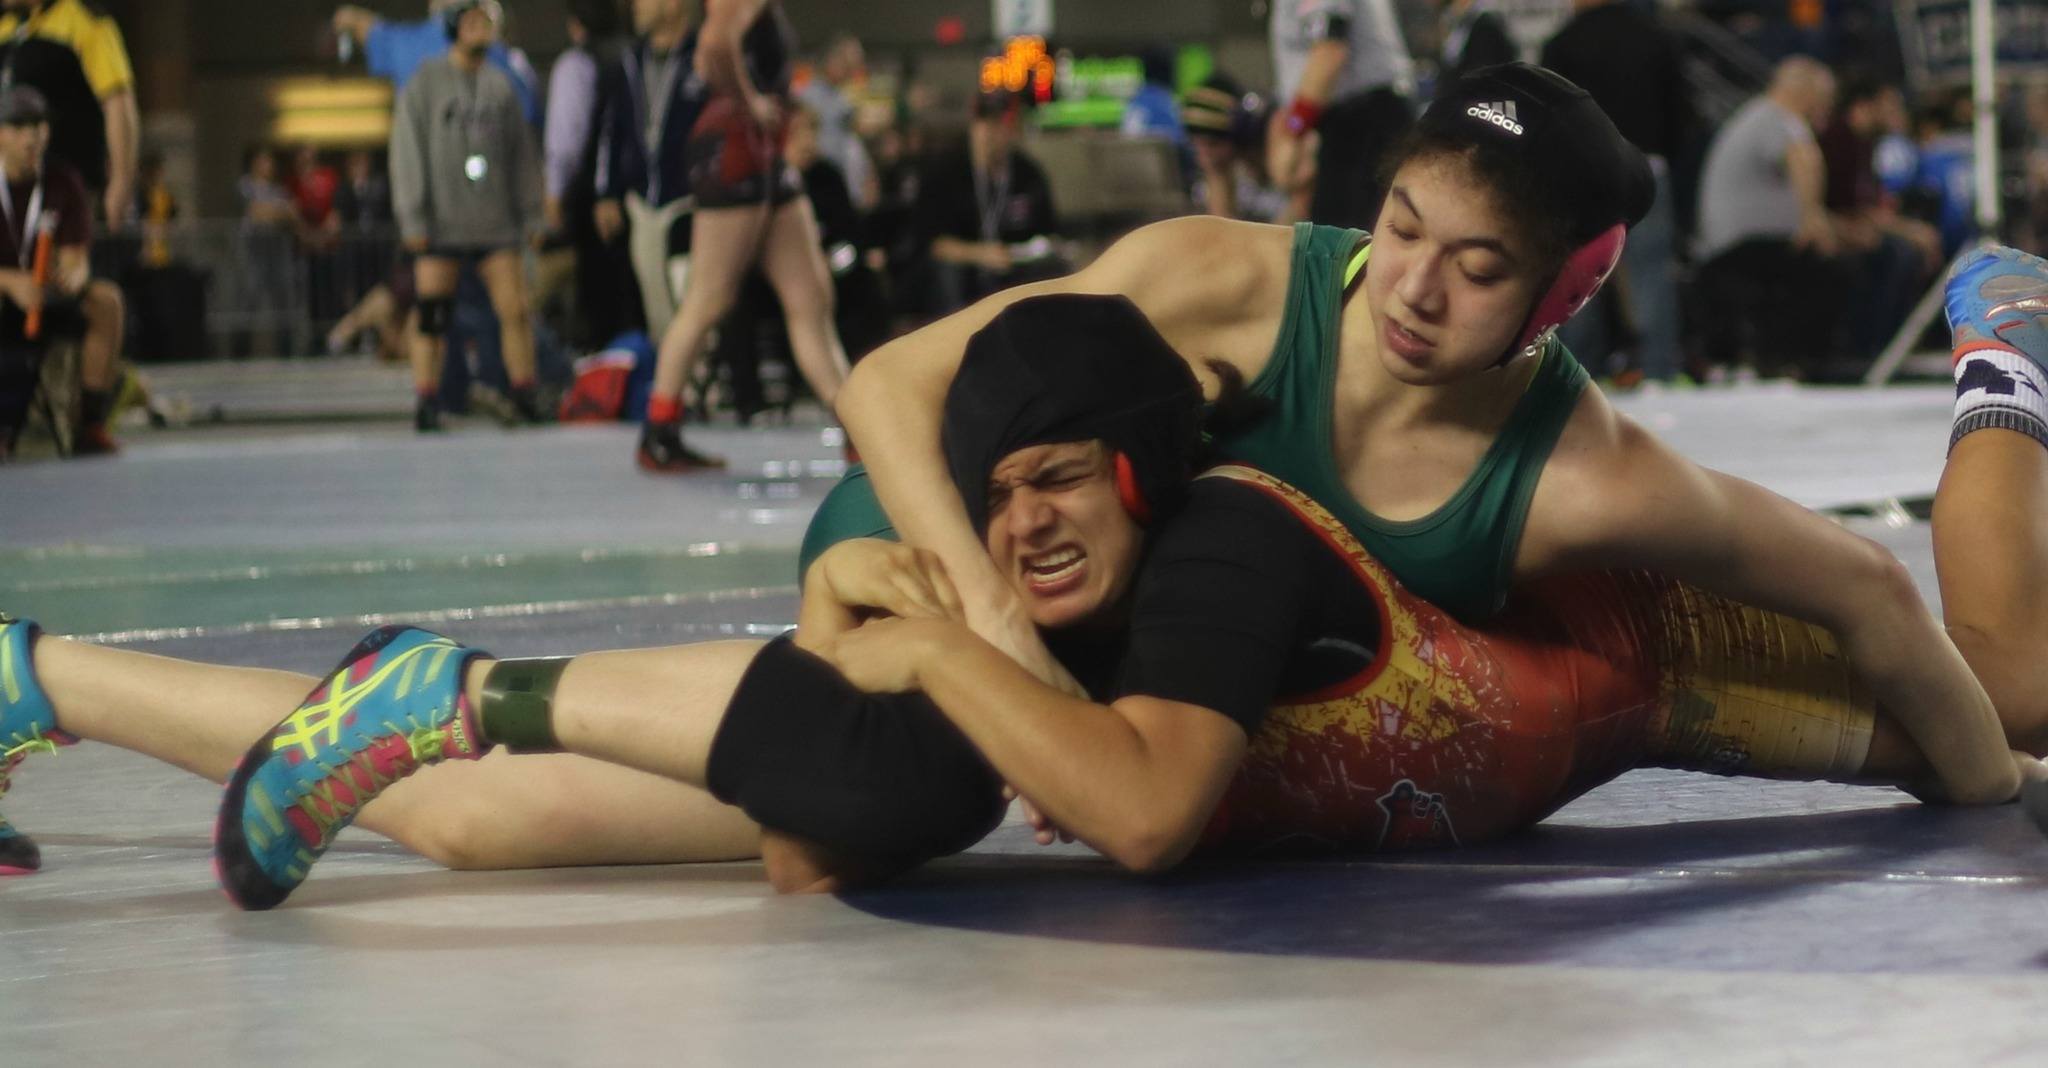 Redmond’s Medvinsky grapples to second place at state meet